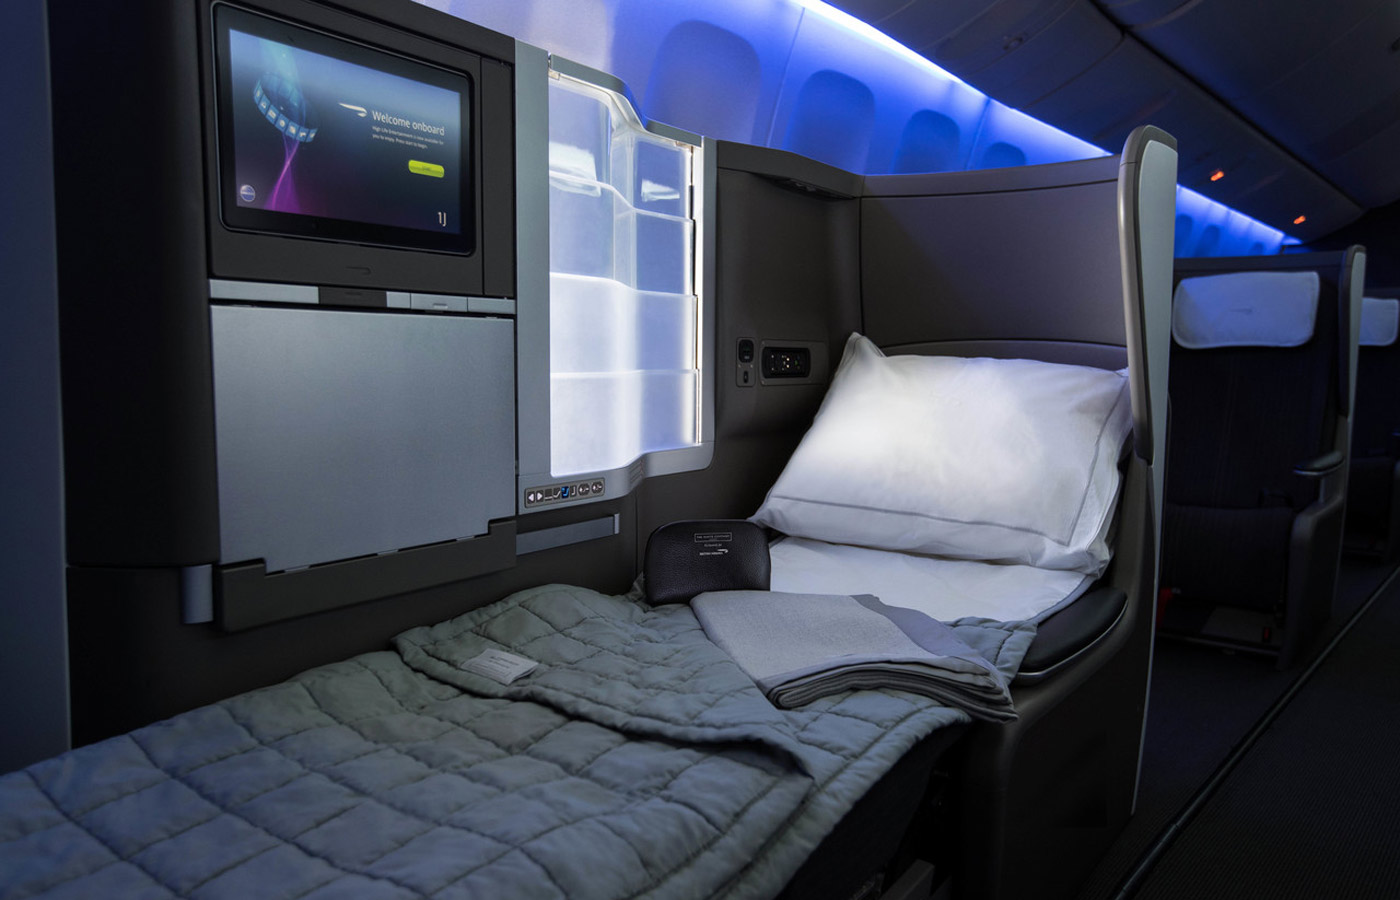 A fully reclining bed in the Club World cabin, British Airways business class